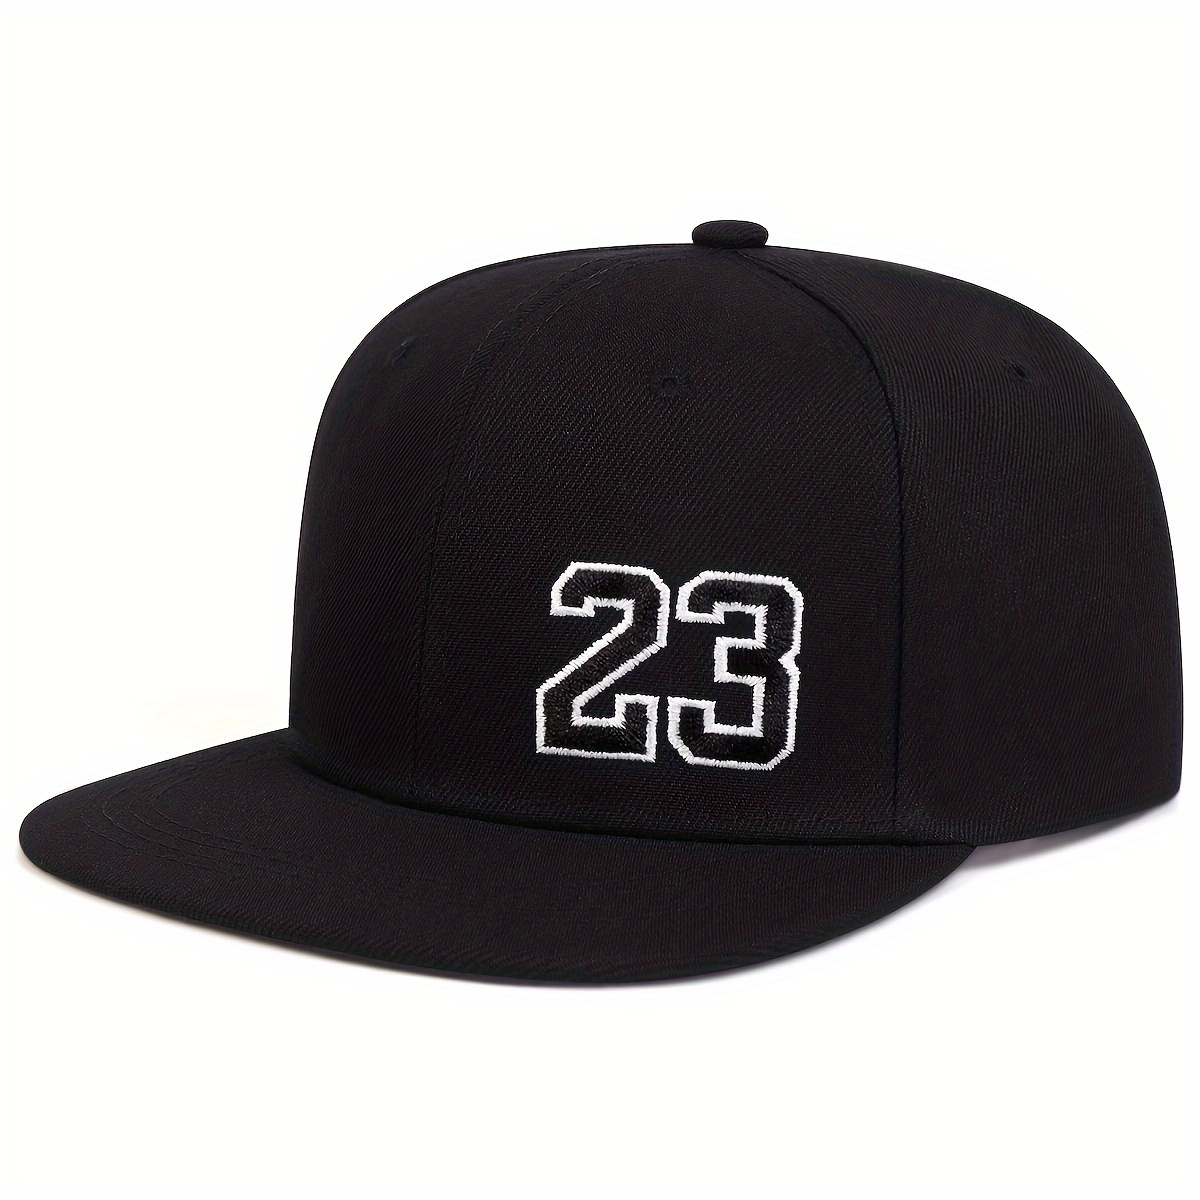 

1pc Number 23 Embroidered Baseball Cap, Trendy Windproof Peaked Cap, Street Sports Casual Style Hat